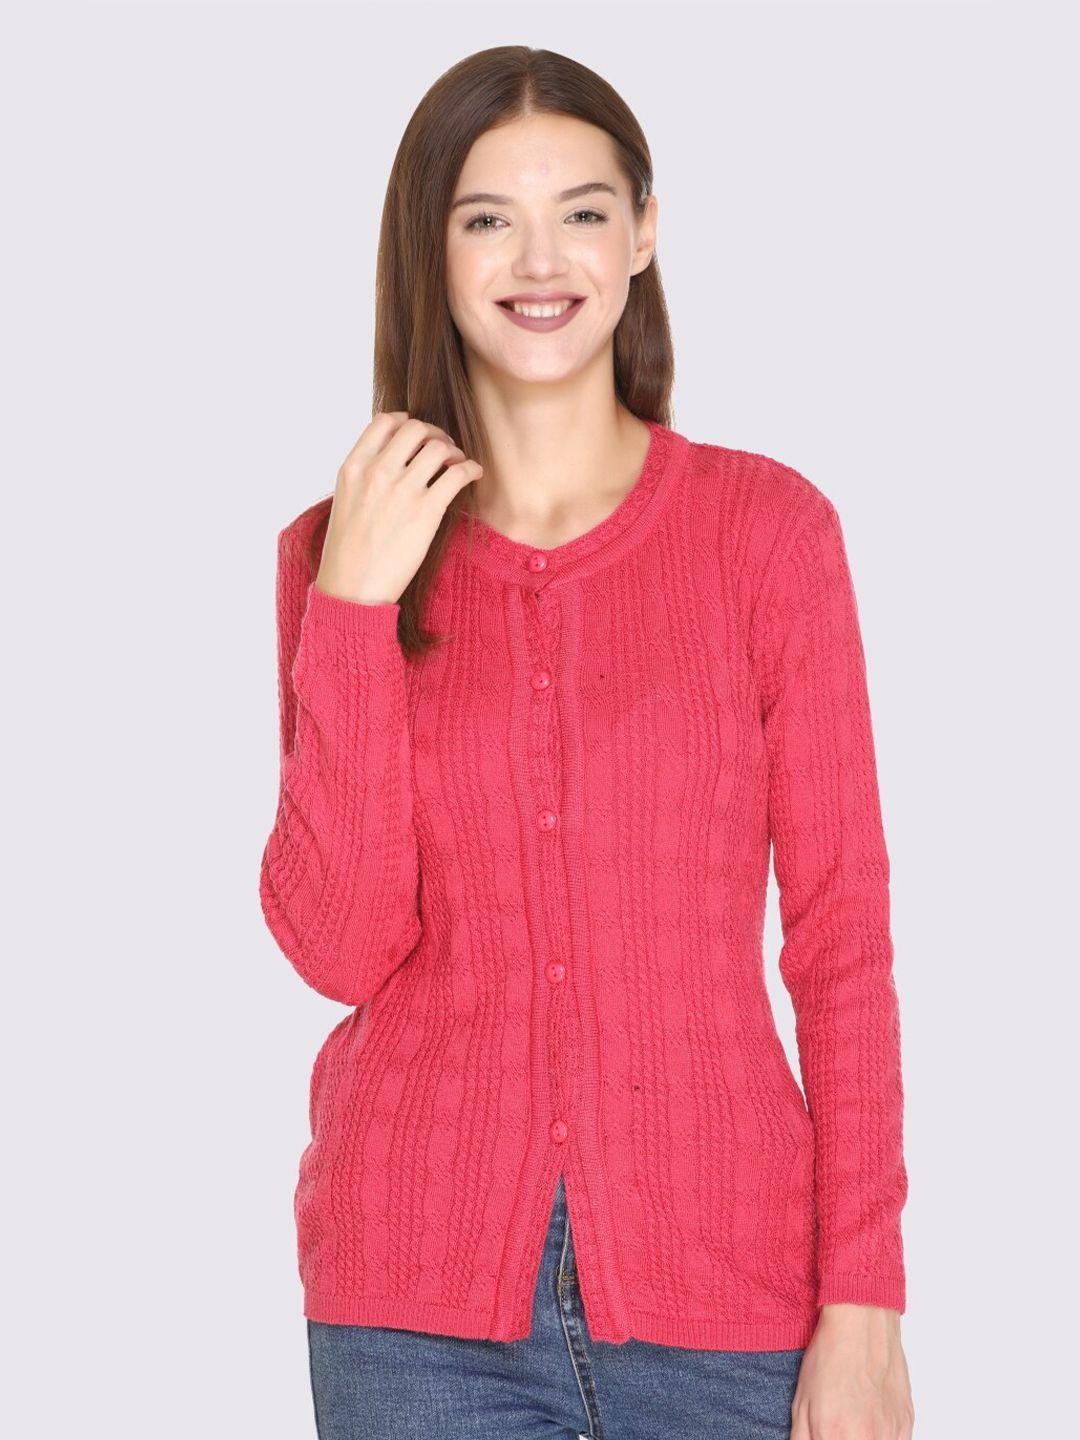 godfrey women pink cable knit cardigan